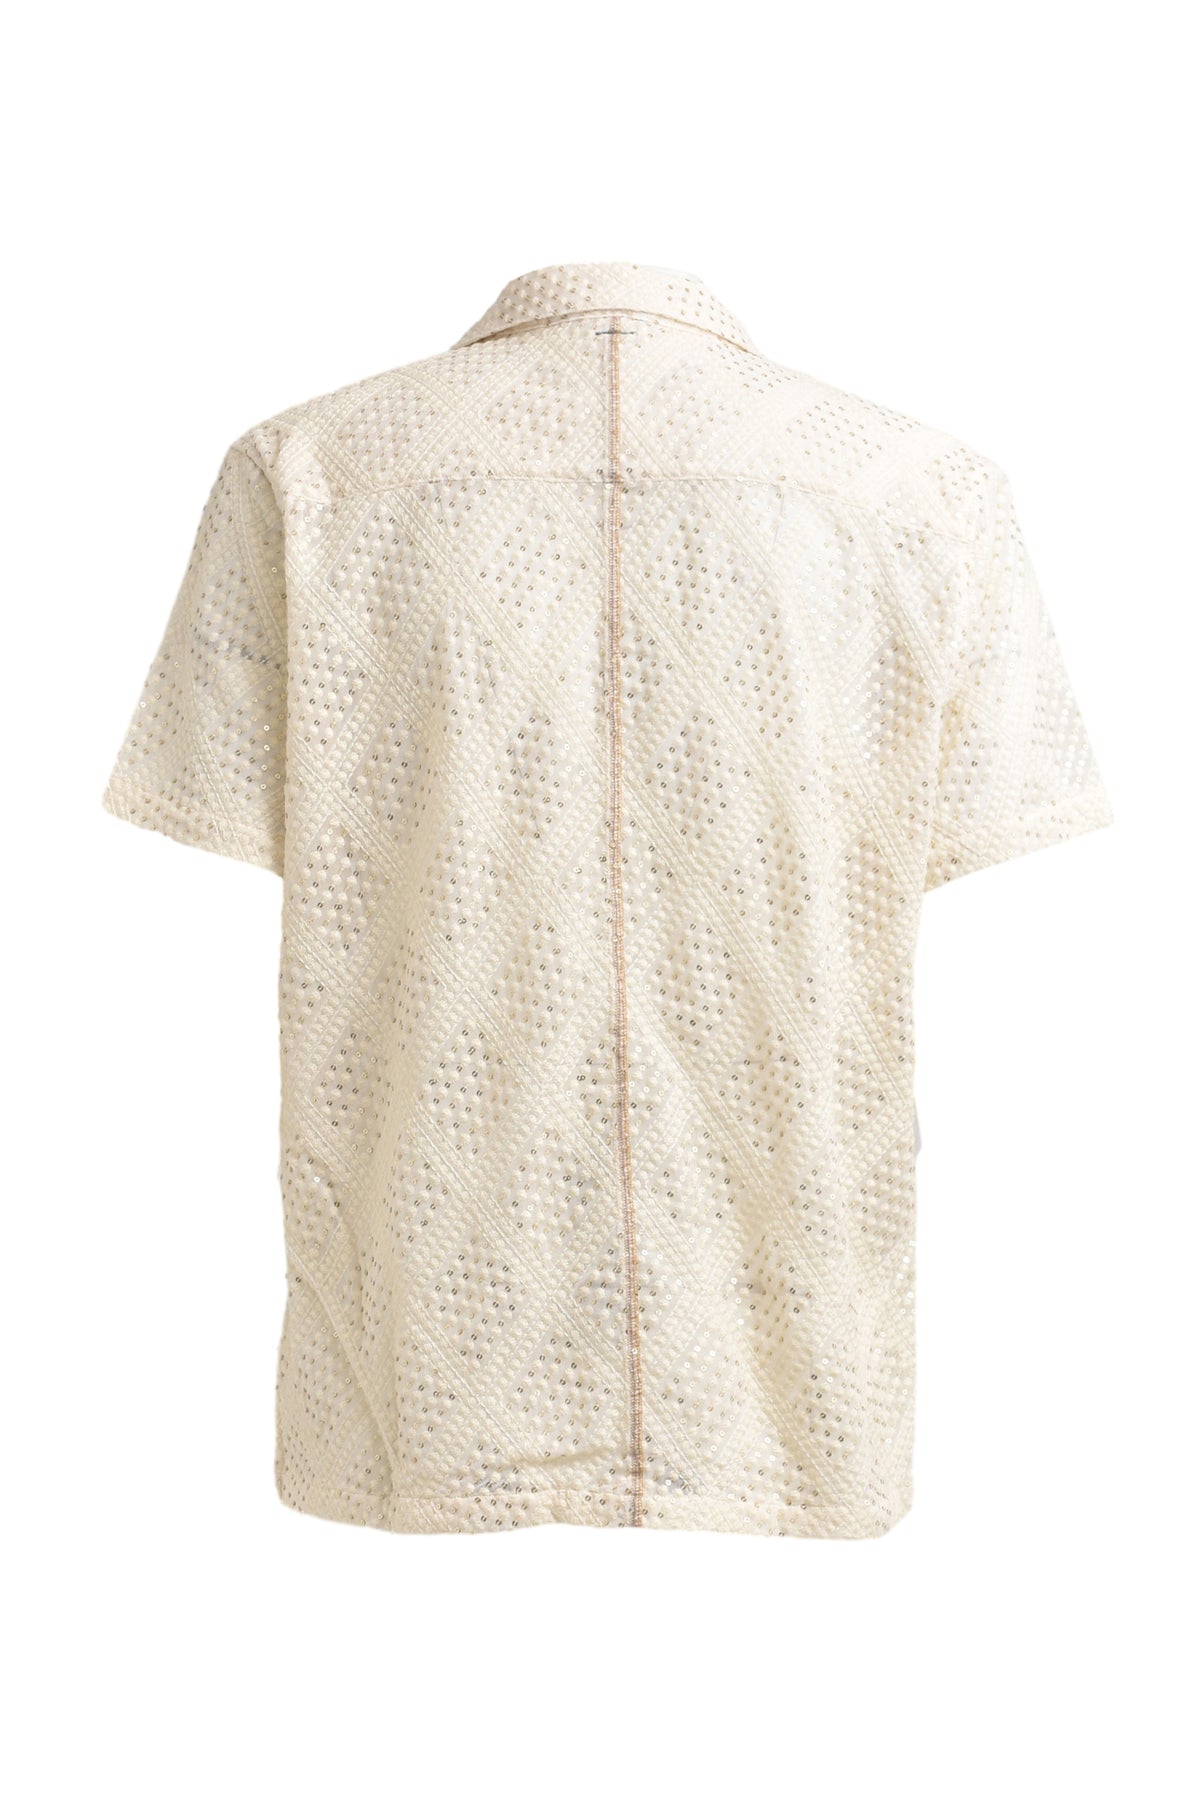 S/S SHIRT AS CANVAS / SPANGLE